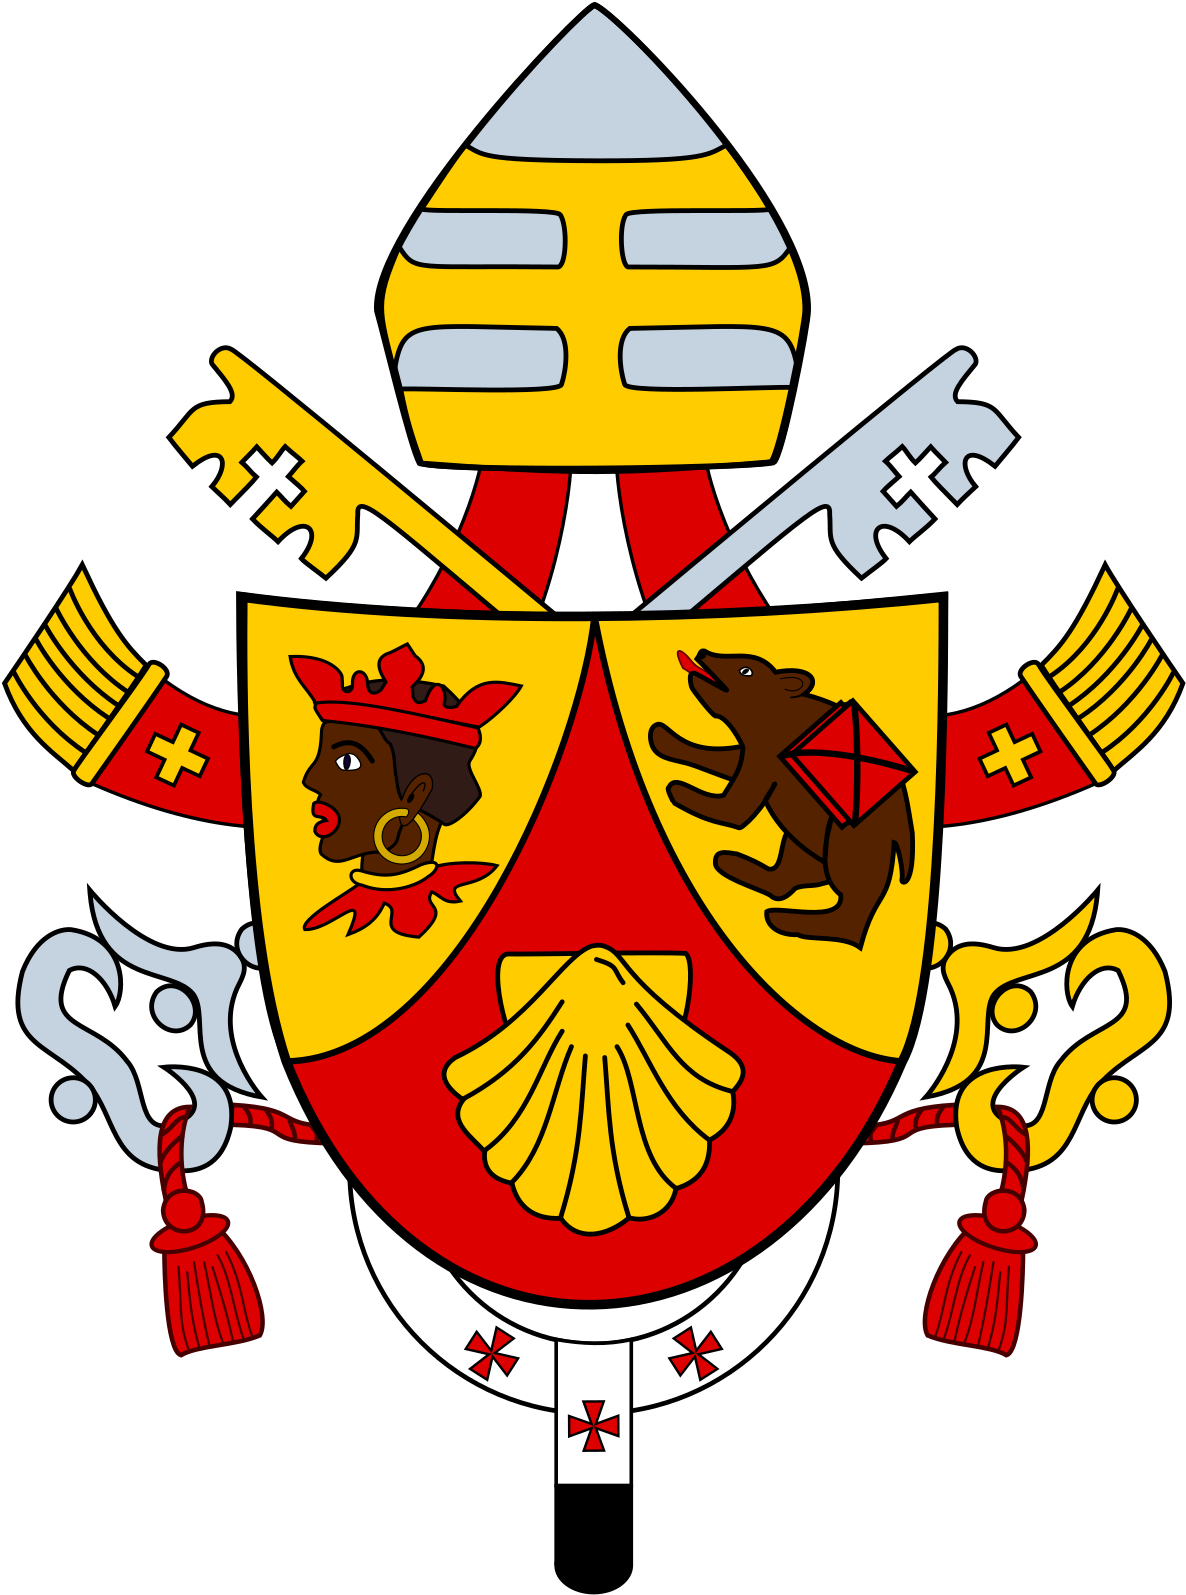 A Red And Yellow Coat Of Arms With Gold And Red Designs